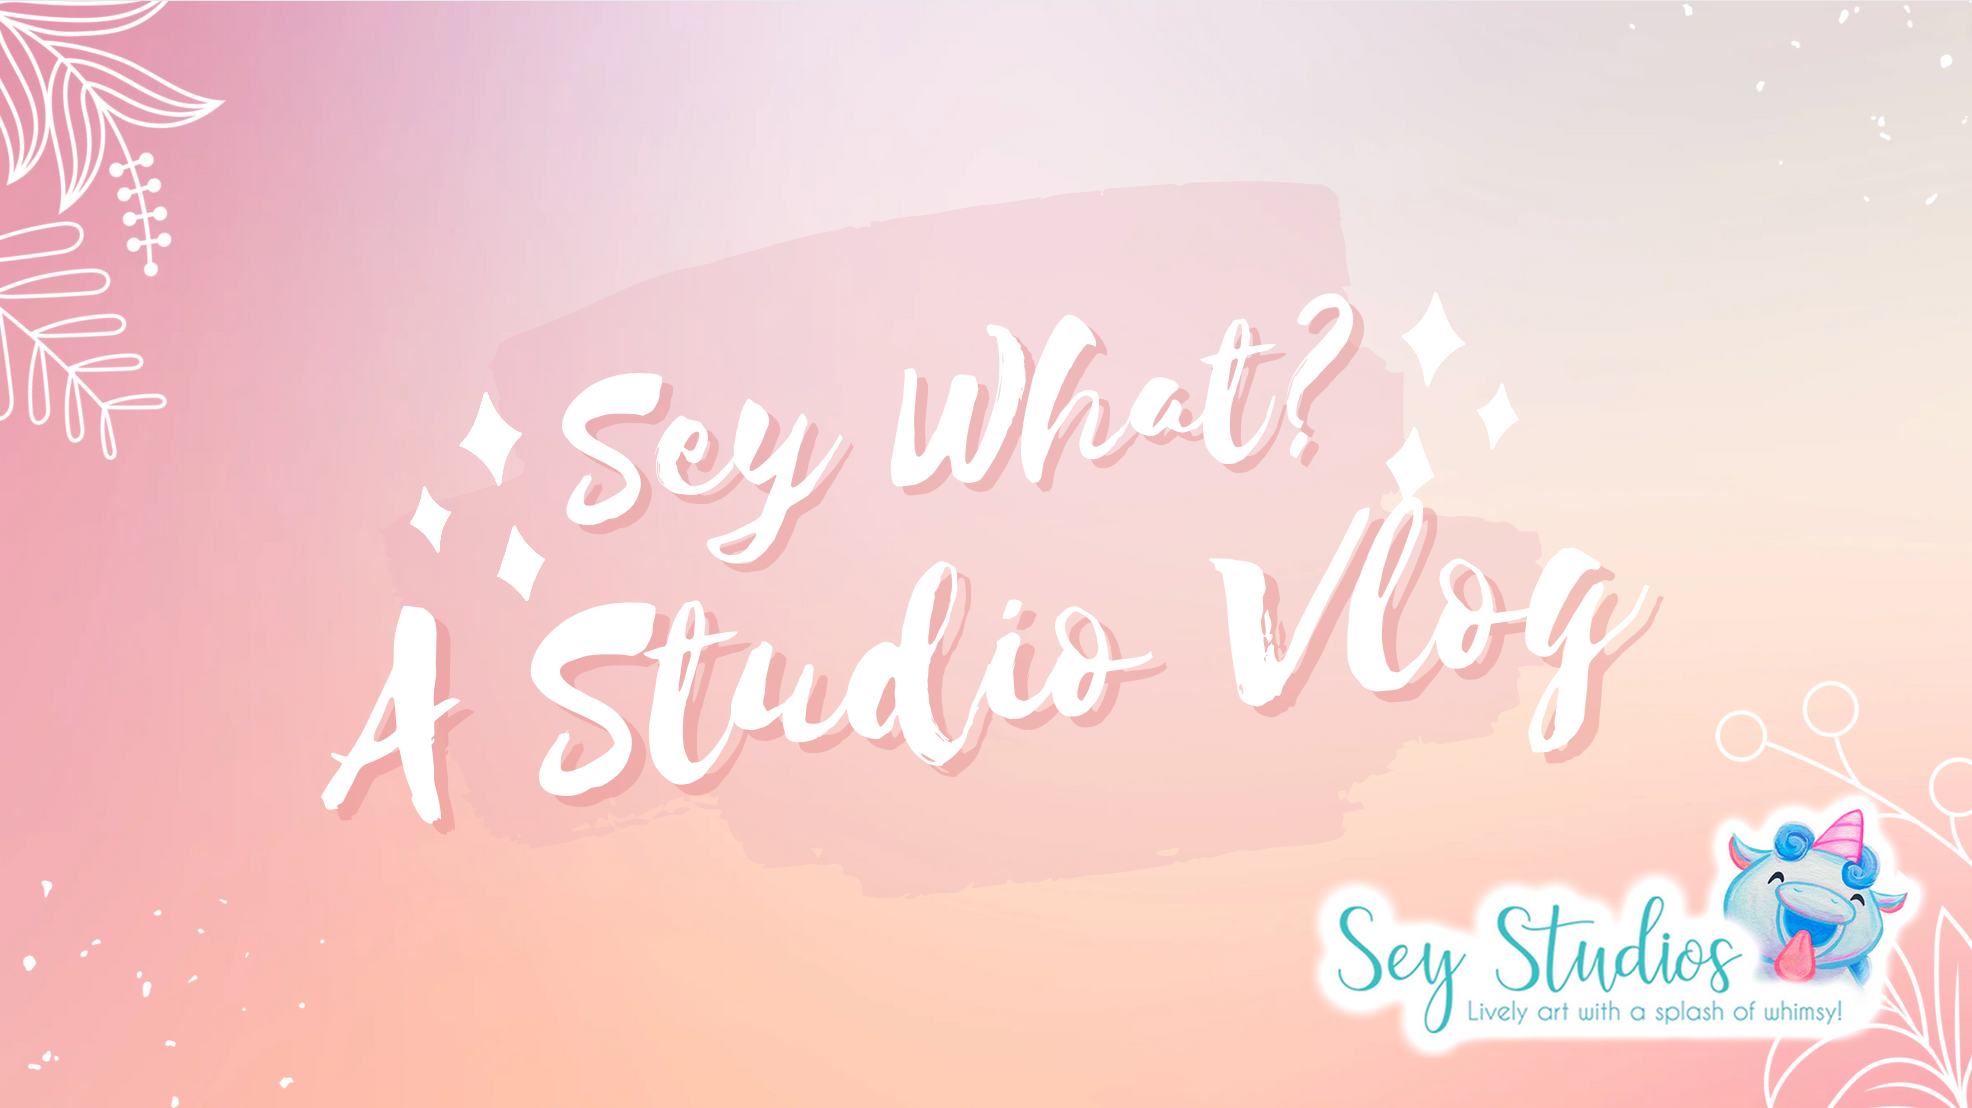 Load video: Episode 10 of Sey What? A Day in the Life of Sey Studios, meeting new creatives, working on new artwork and products, and more!